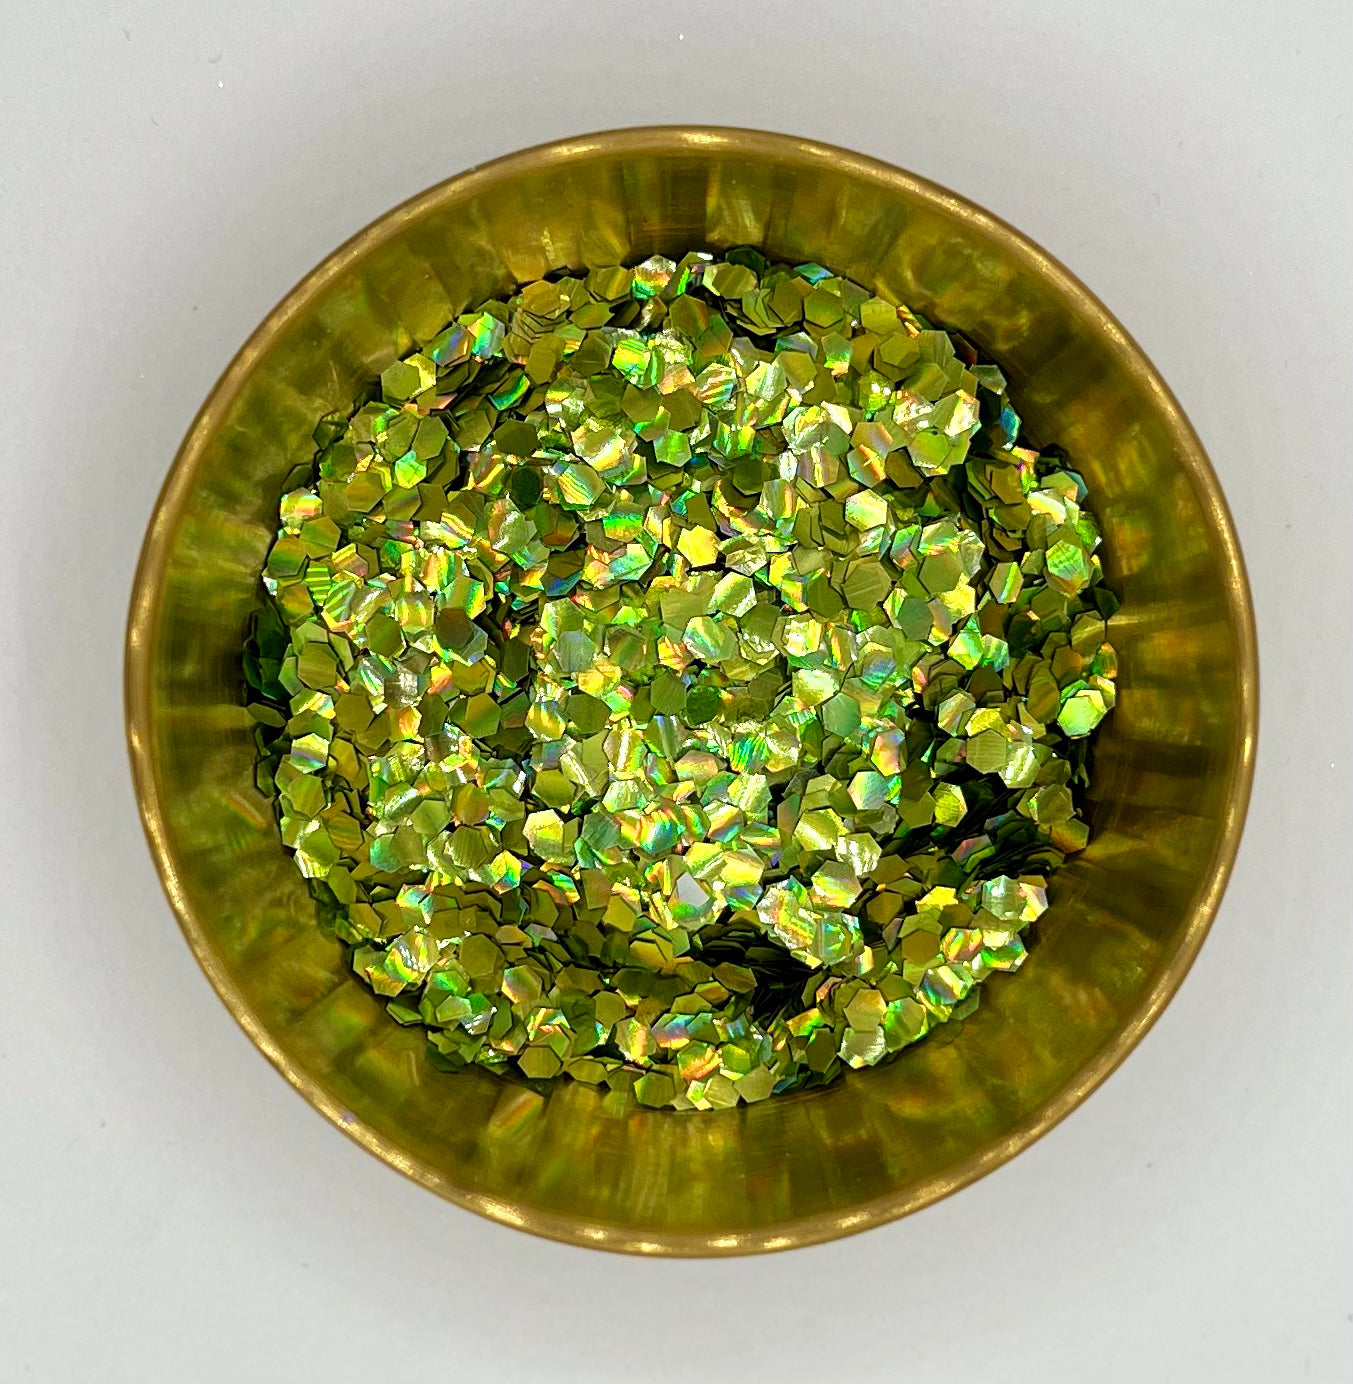 Holo Green Day Super Chunky Holographic Biodegradable Glitter